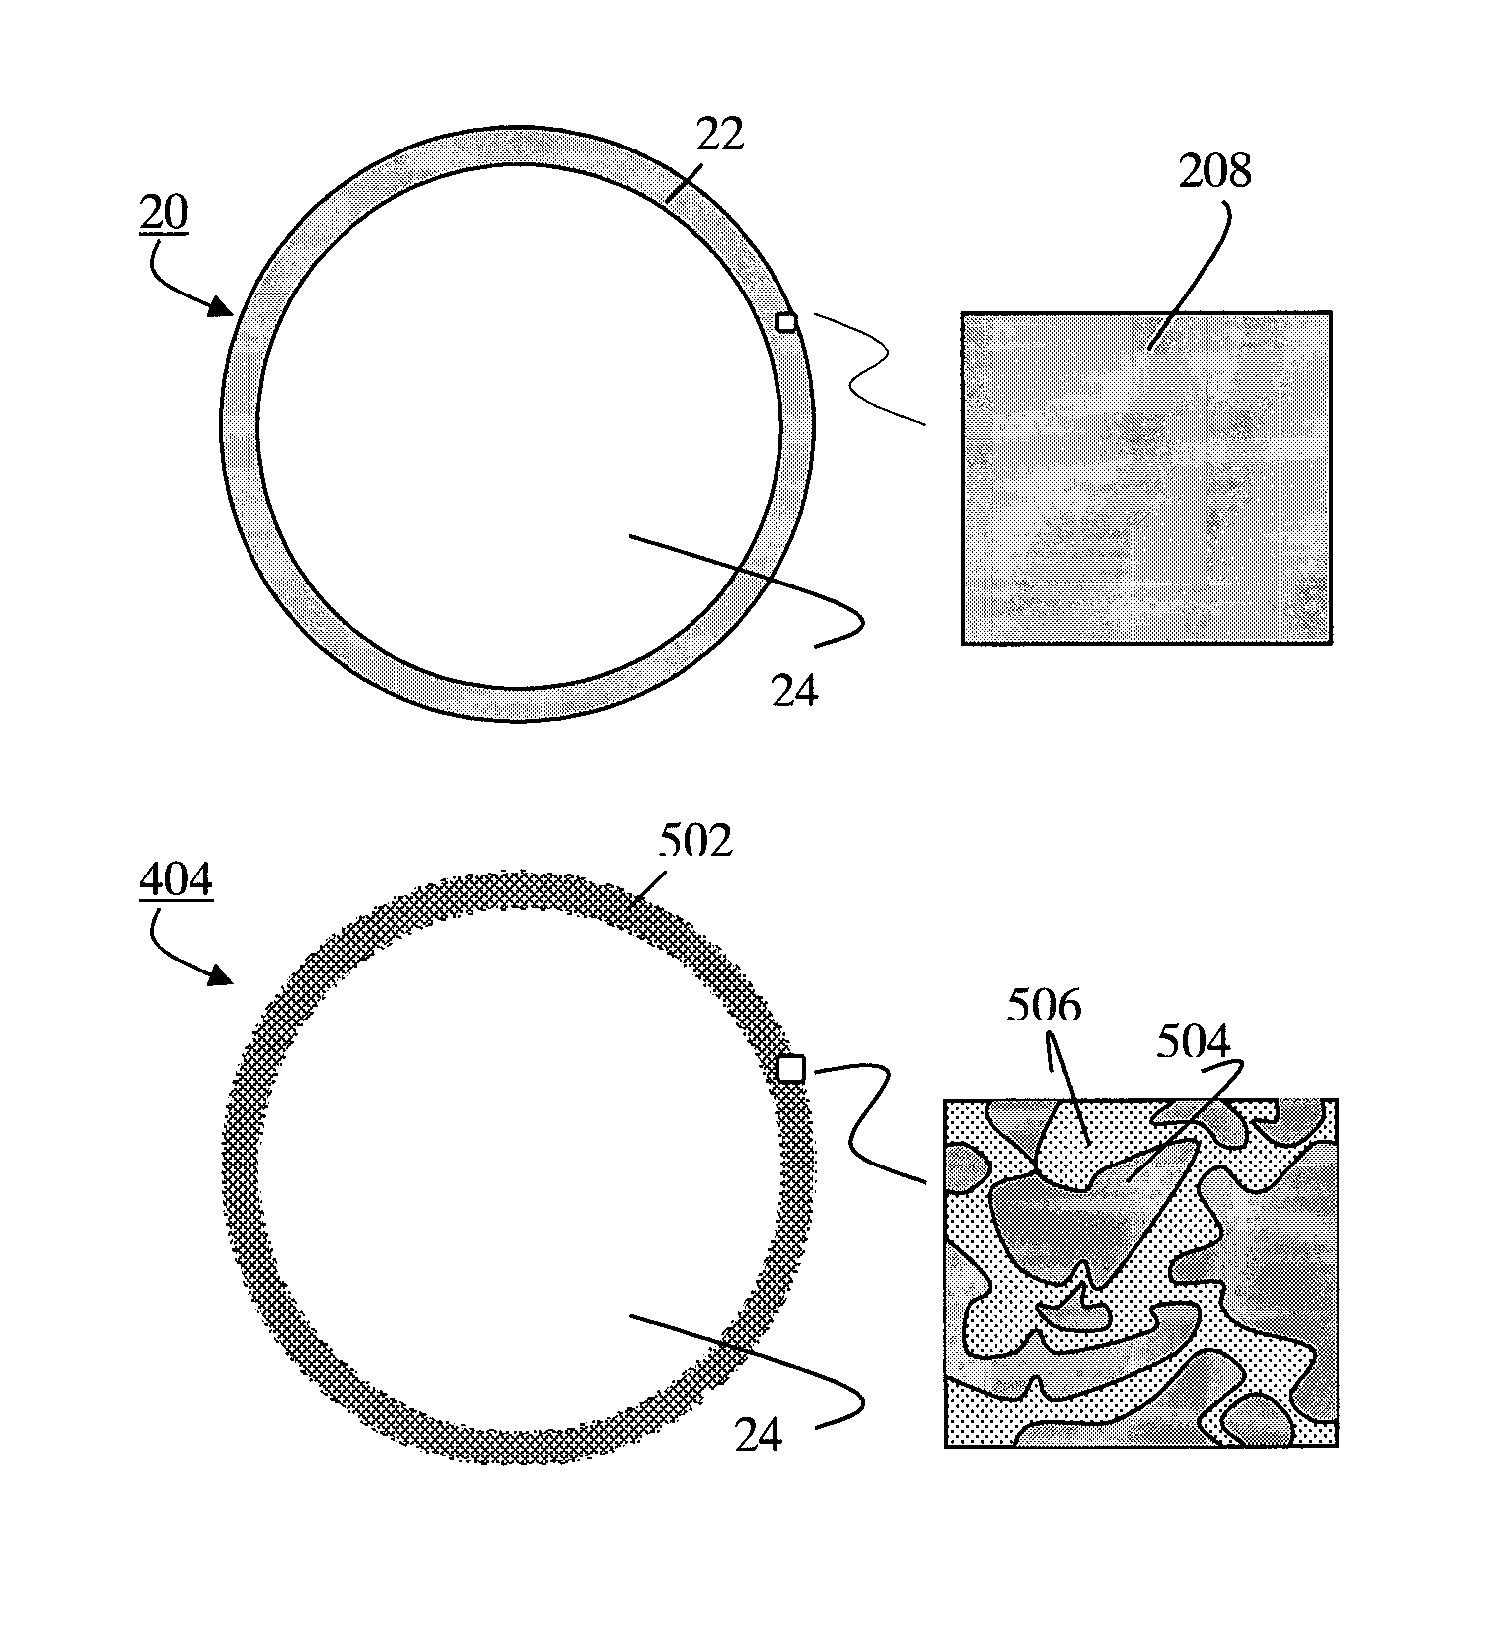 Fluid permeable and vacuumed insulating microspheres and methods of producing the same